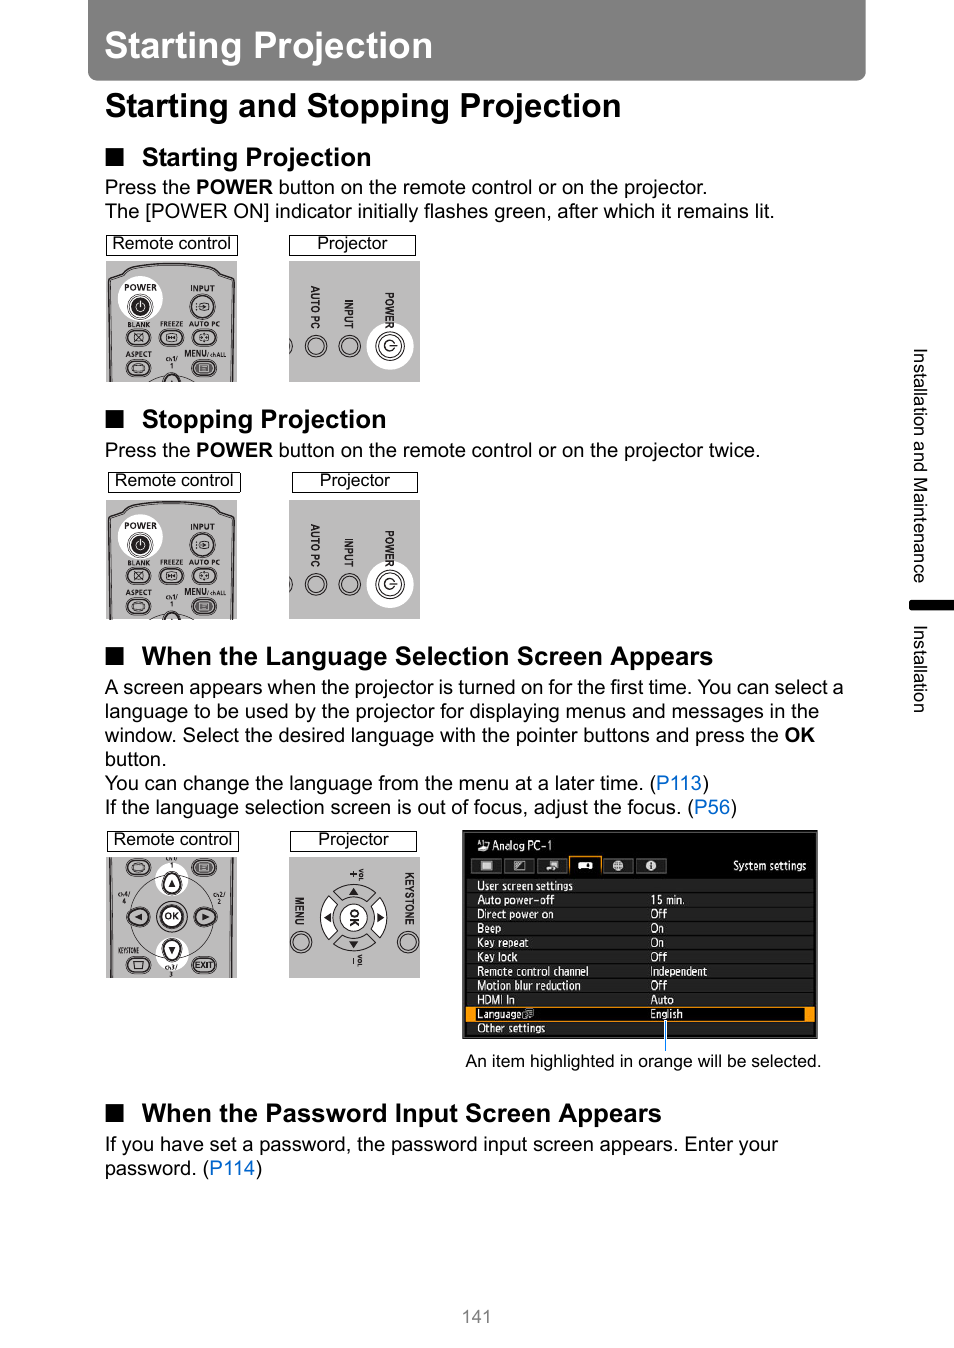 Starting projection, Starting and stopping projection, Stopping projection | When the language selection screen appears, When the password input screen appears, P141 | Canon XEED WUX450 User Manual | Page 141 / 308